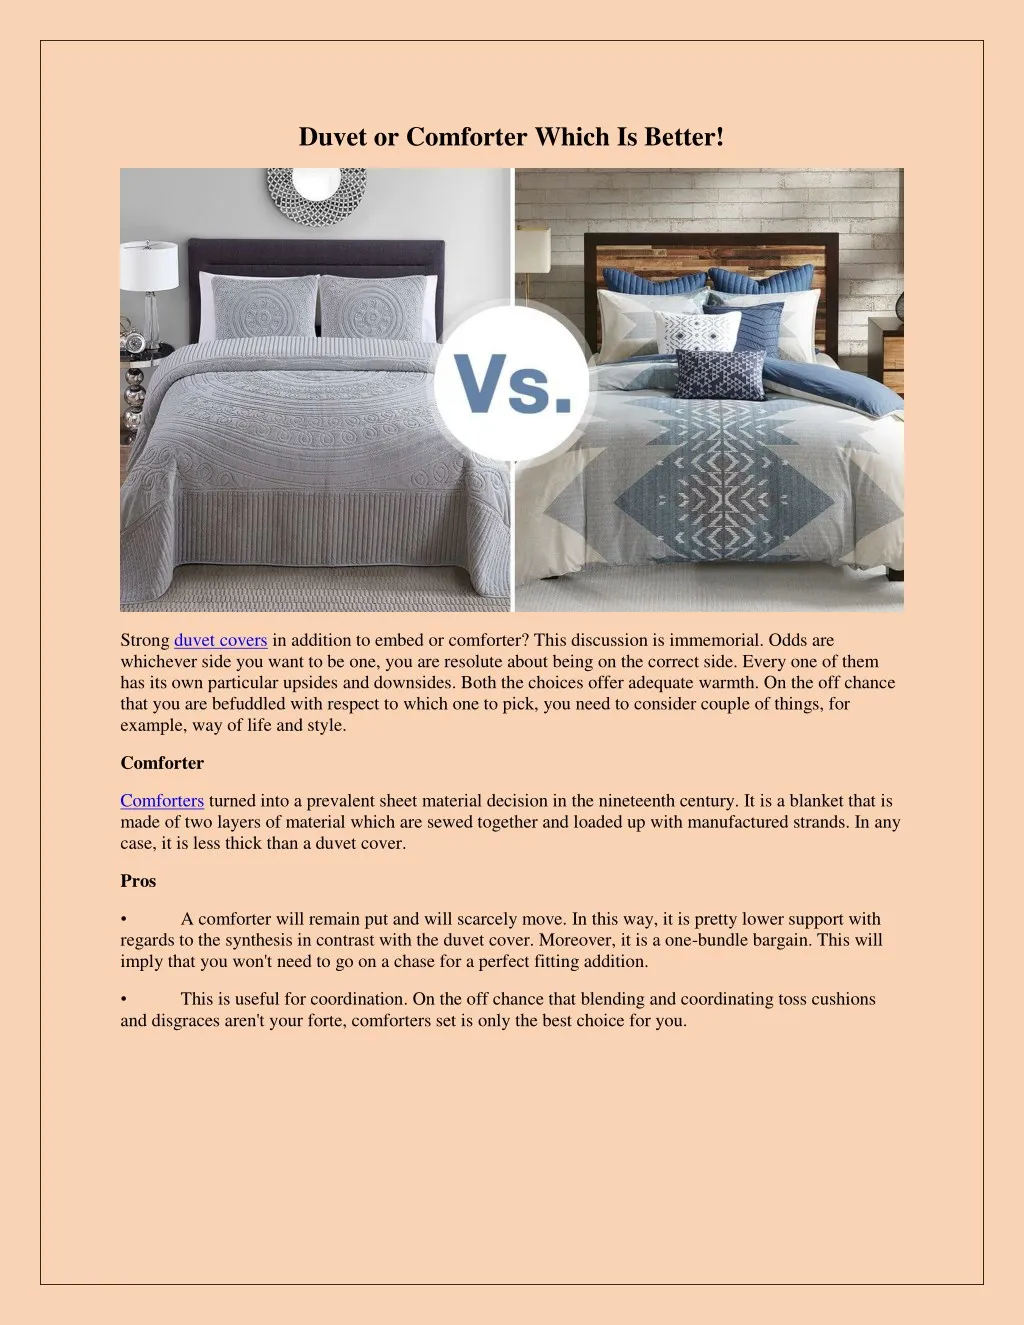 duvet or comforter which is better